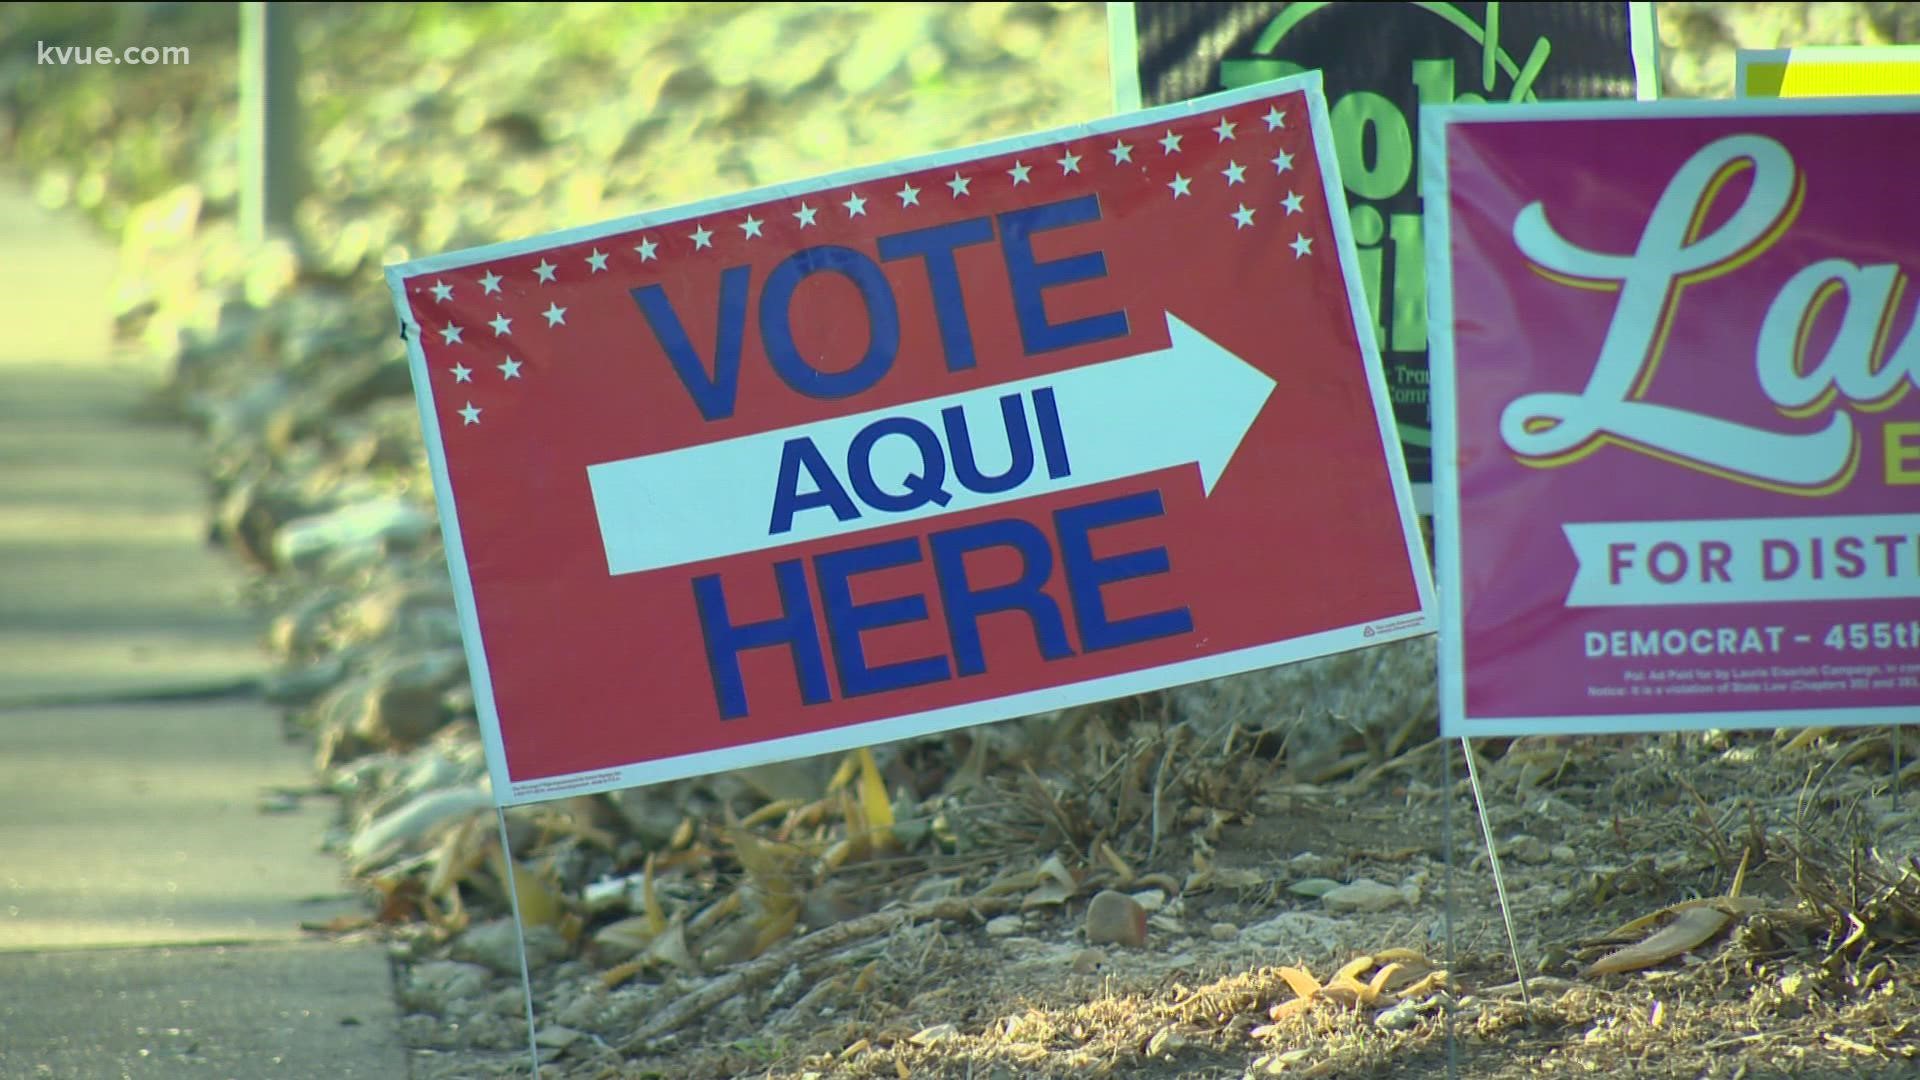 Early voting locations in Travis County will be open on Friday until 10 p.m.